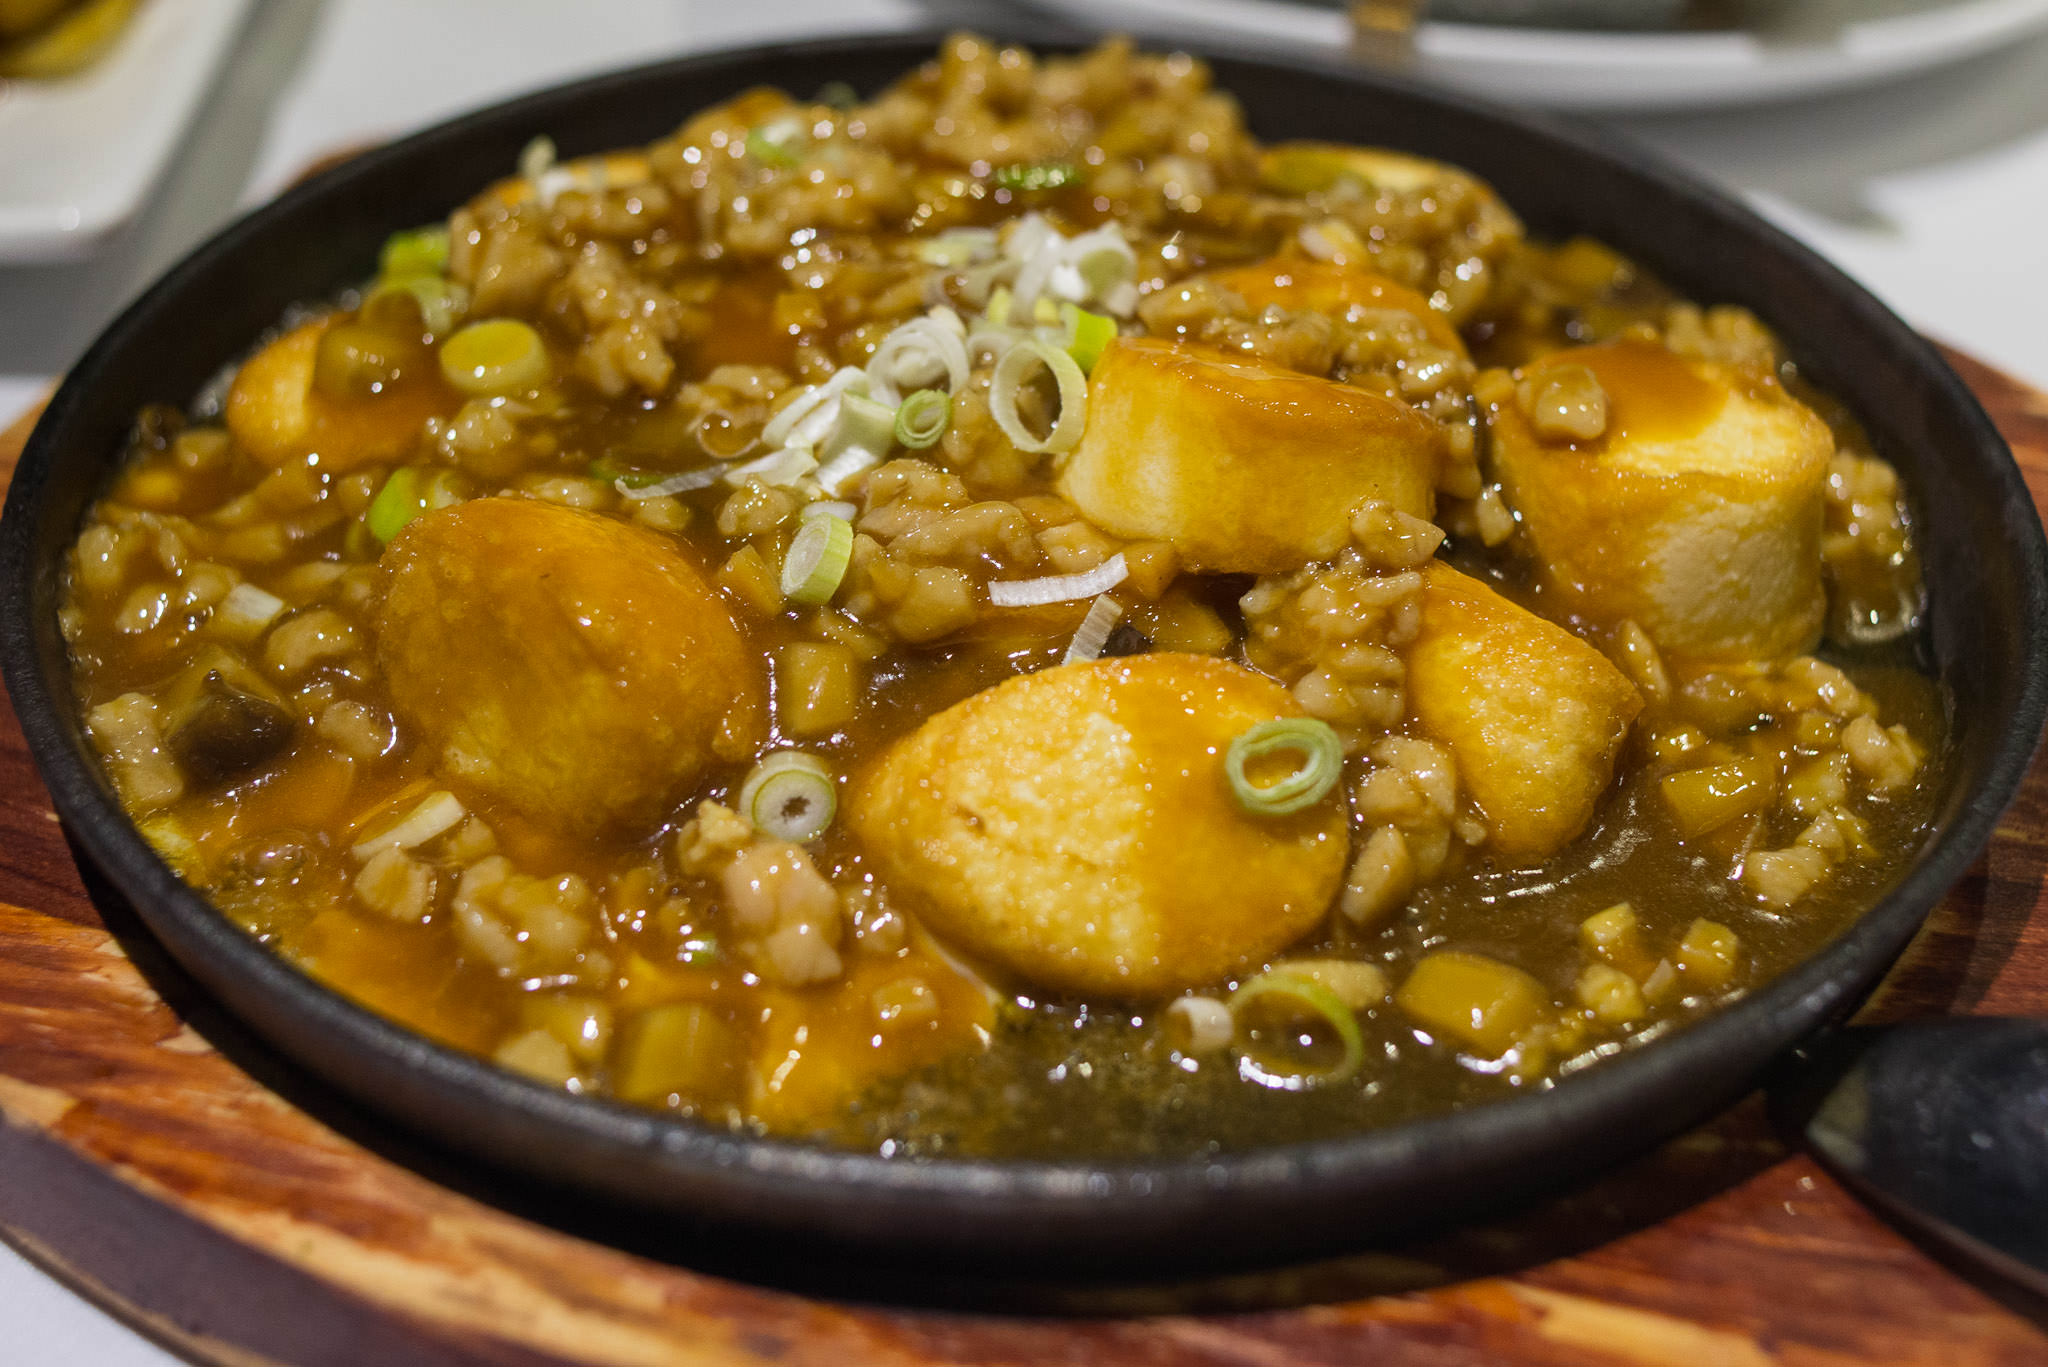 Sizzling Japanese tofu with diced chicken and salted fish (AU$15.80)